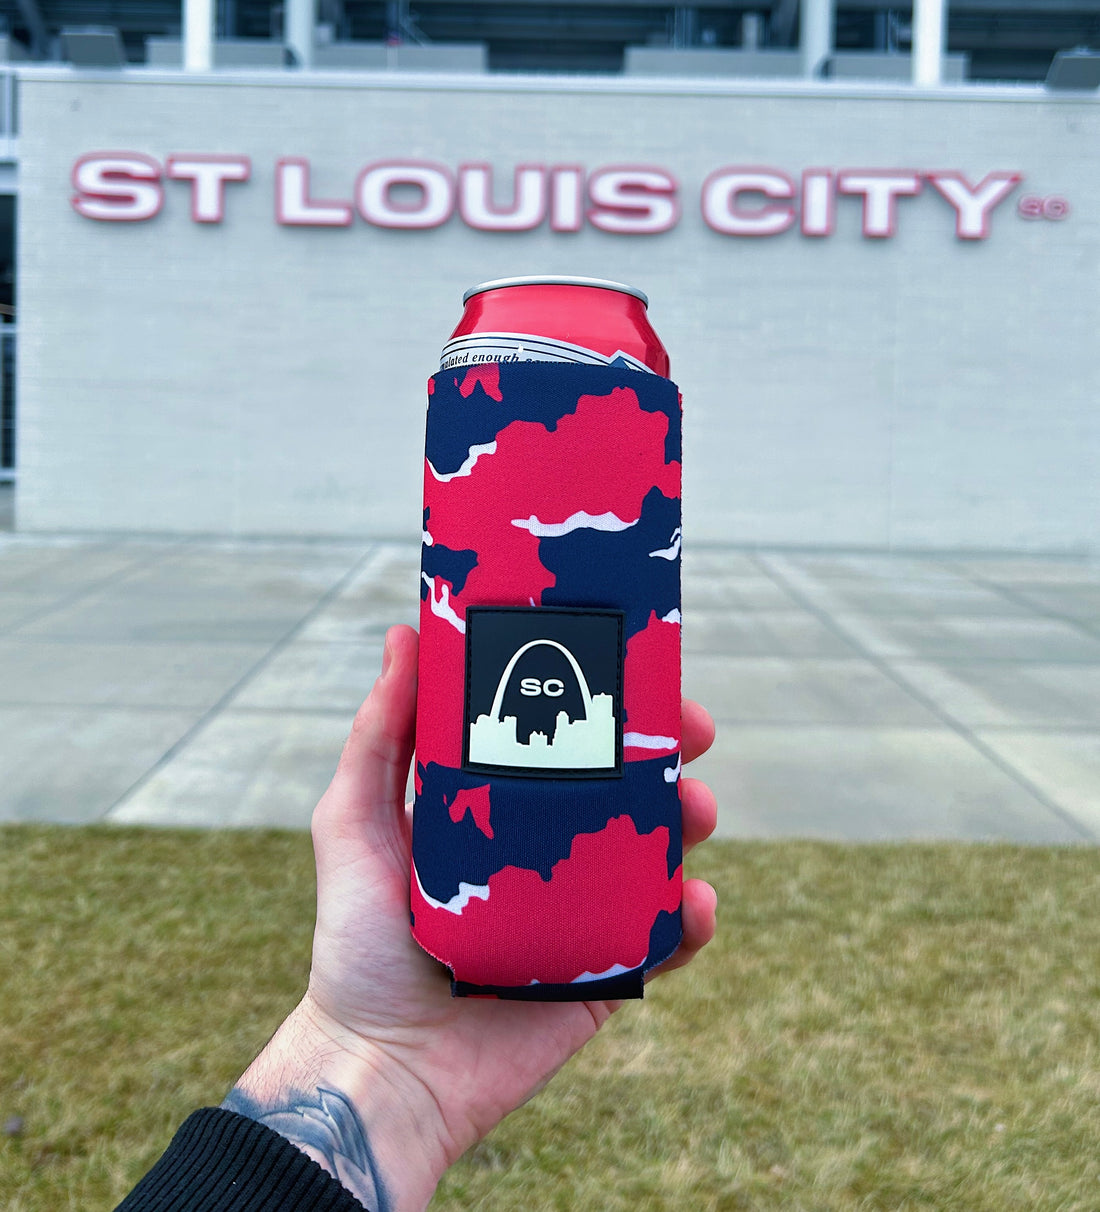 Introducing our STL City Soccer 24 oz tall can insulator!